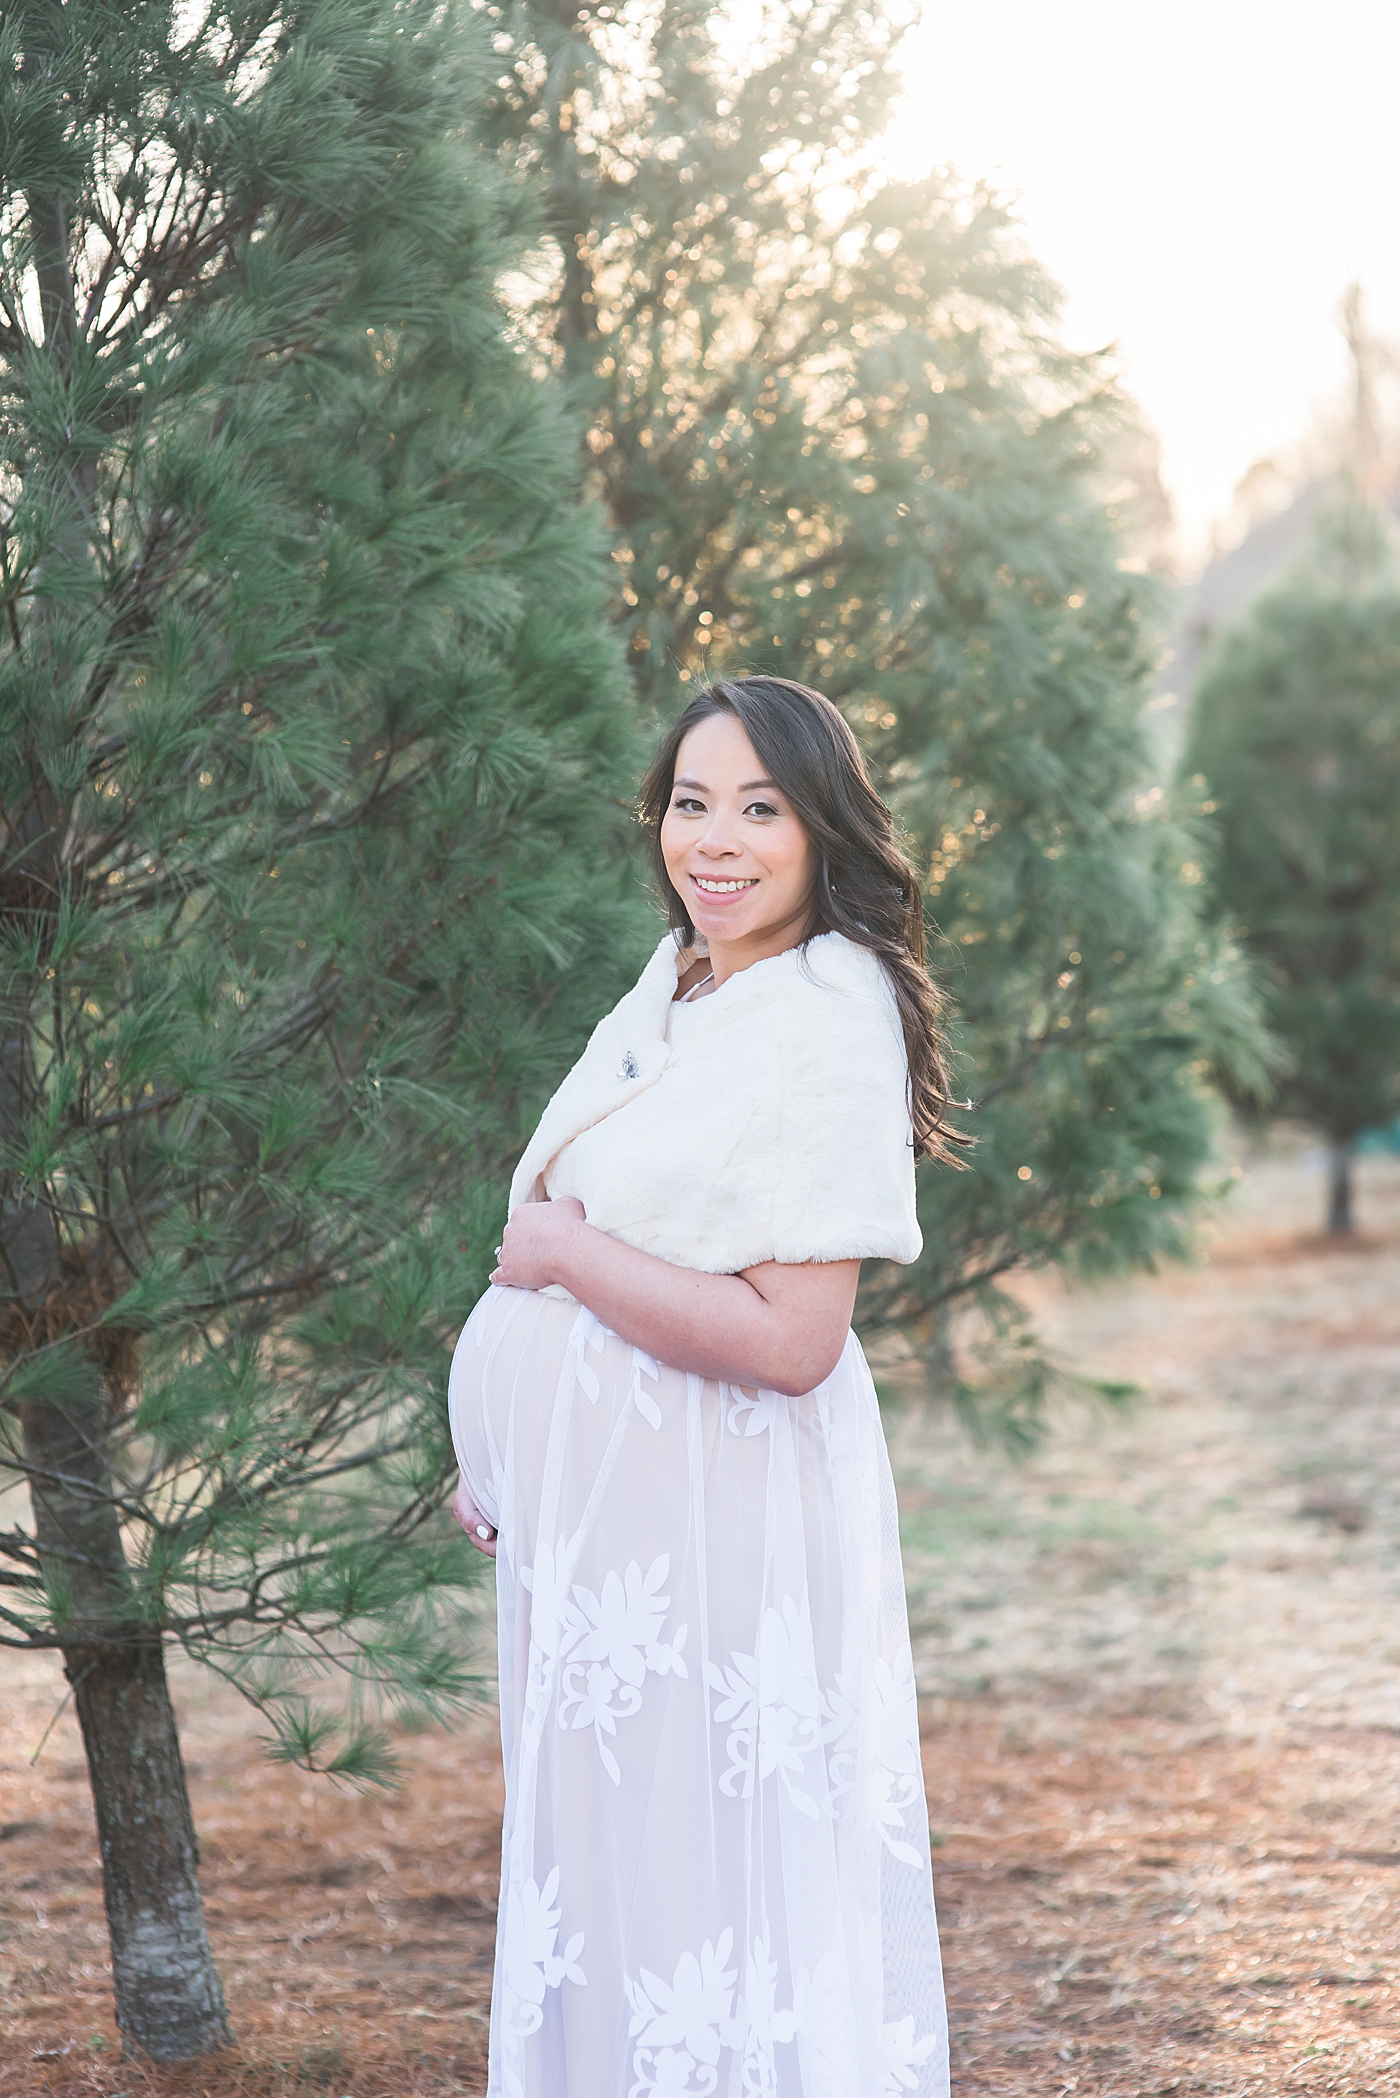 Mom to be in white shawl and lace dress smiling | Photo by Anna Wisjo Photography